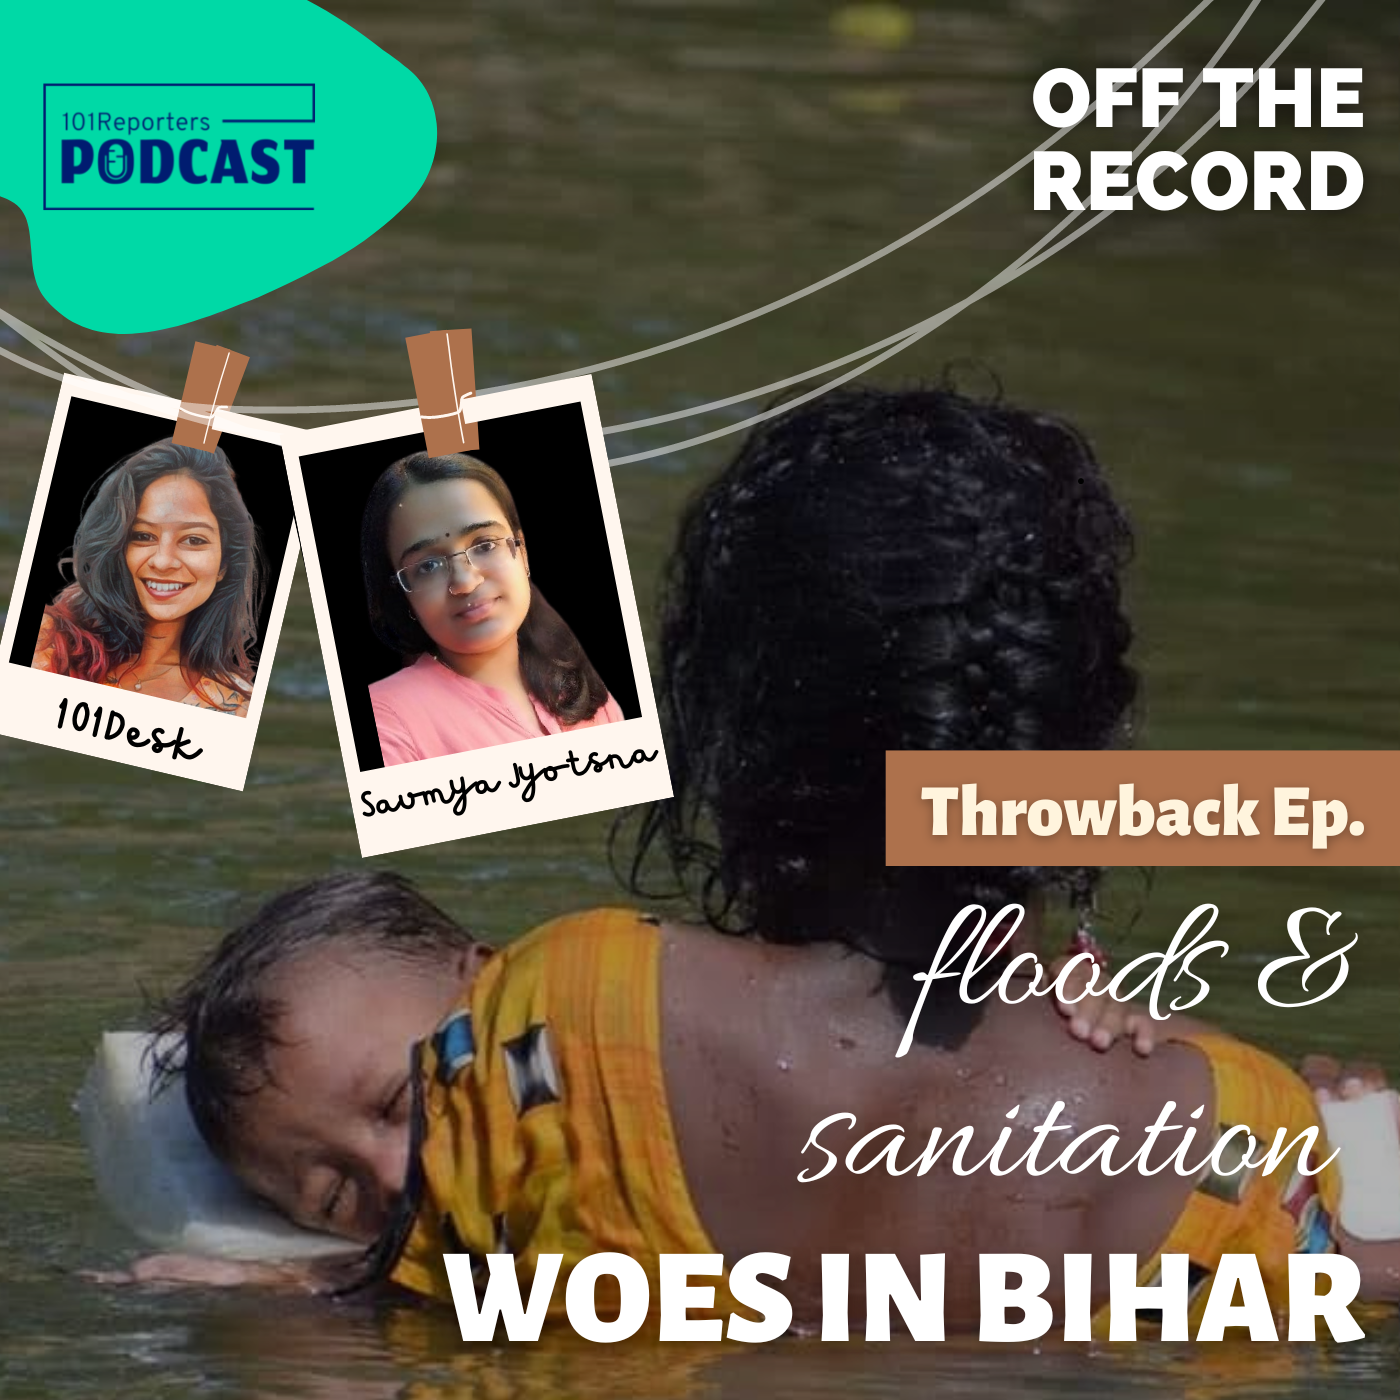 Floods and Sanitation woes in Bihar | Throwback Episode